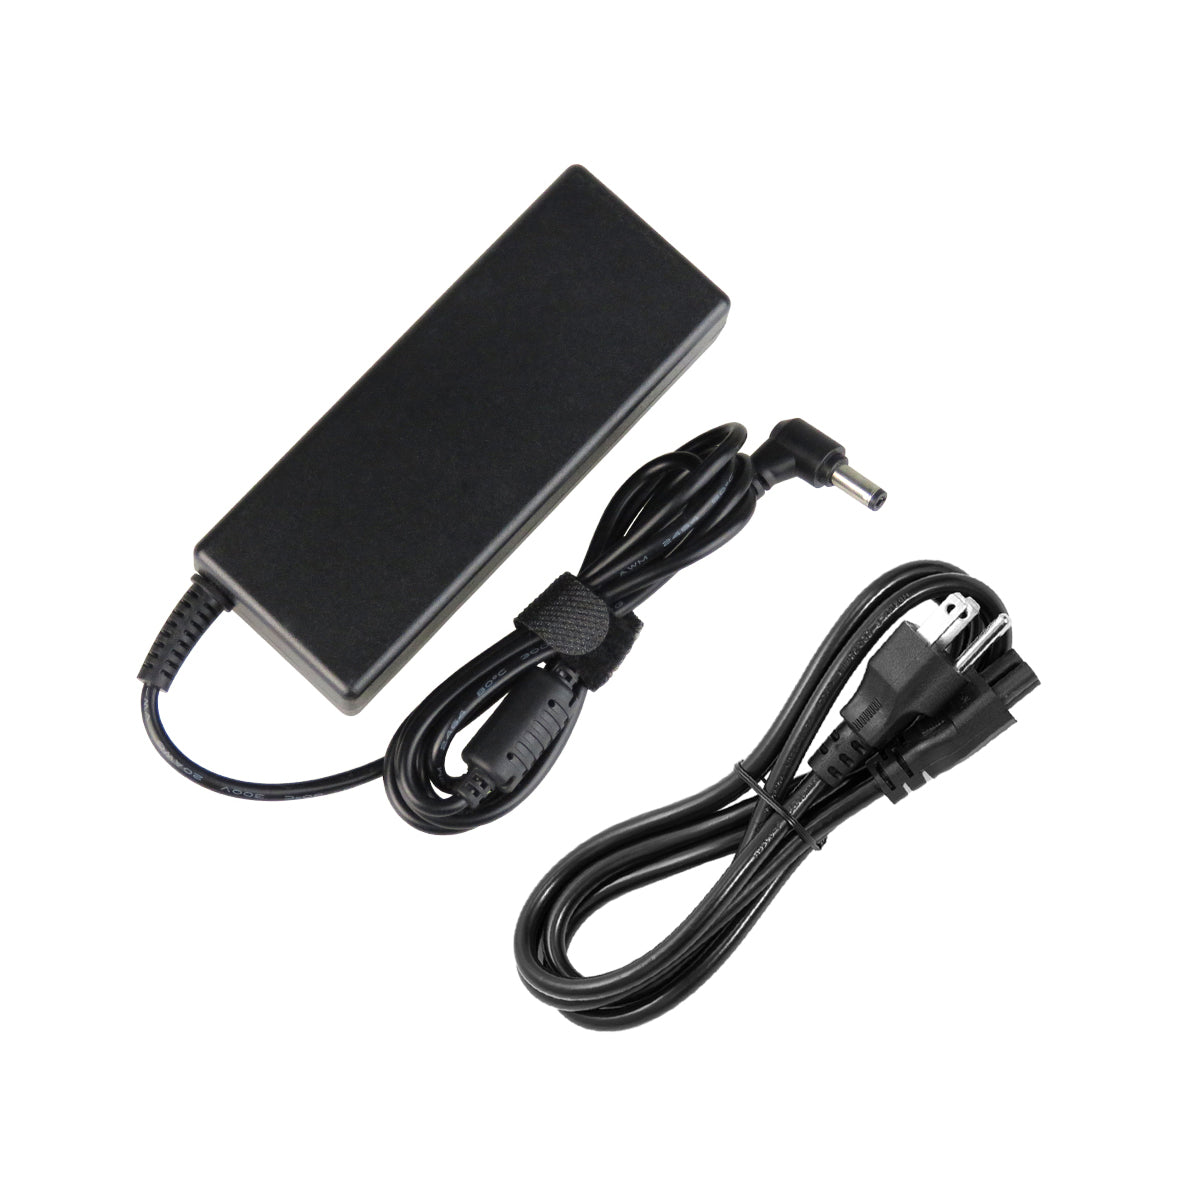 AC Adapter Charger for ASUS X56S Notebook.